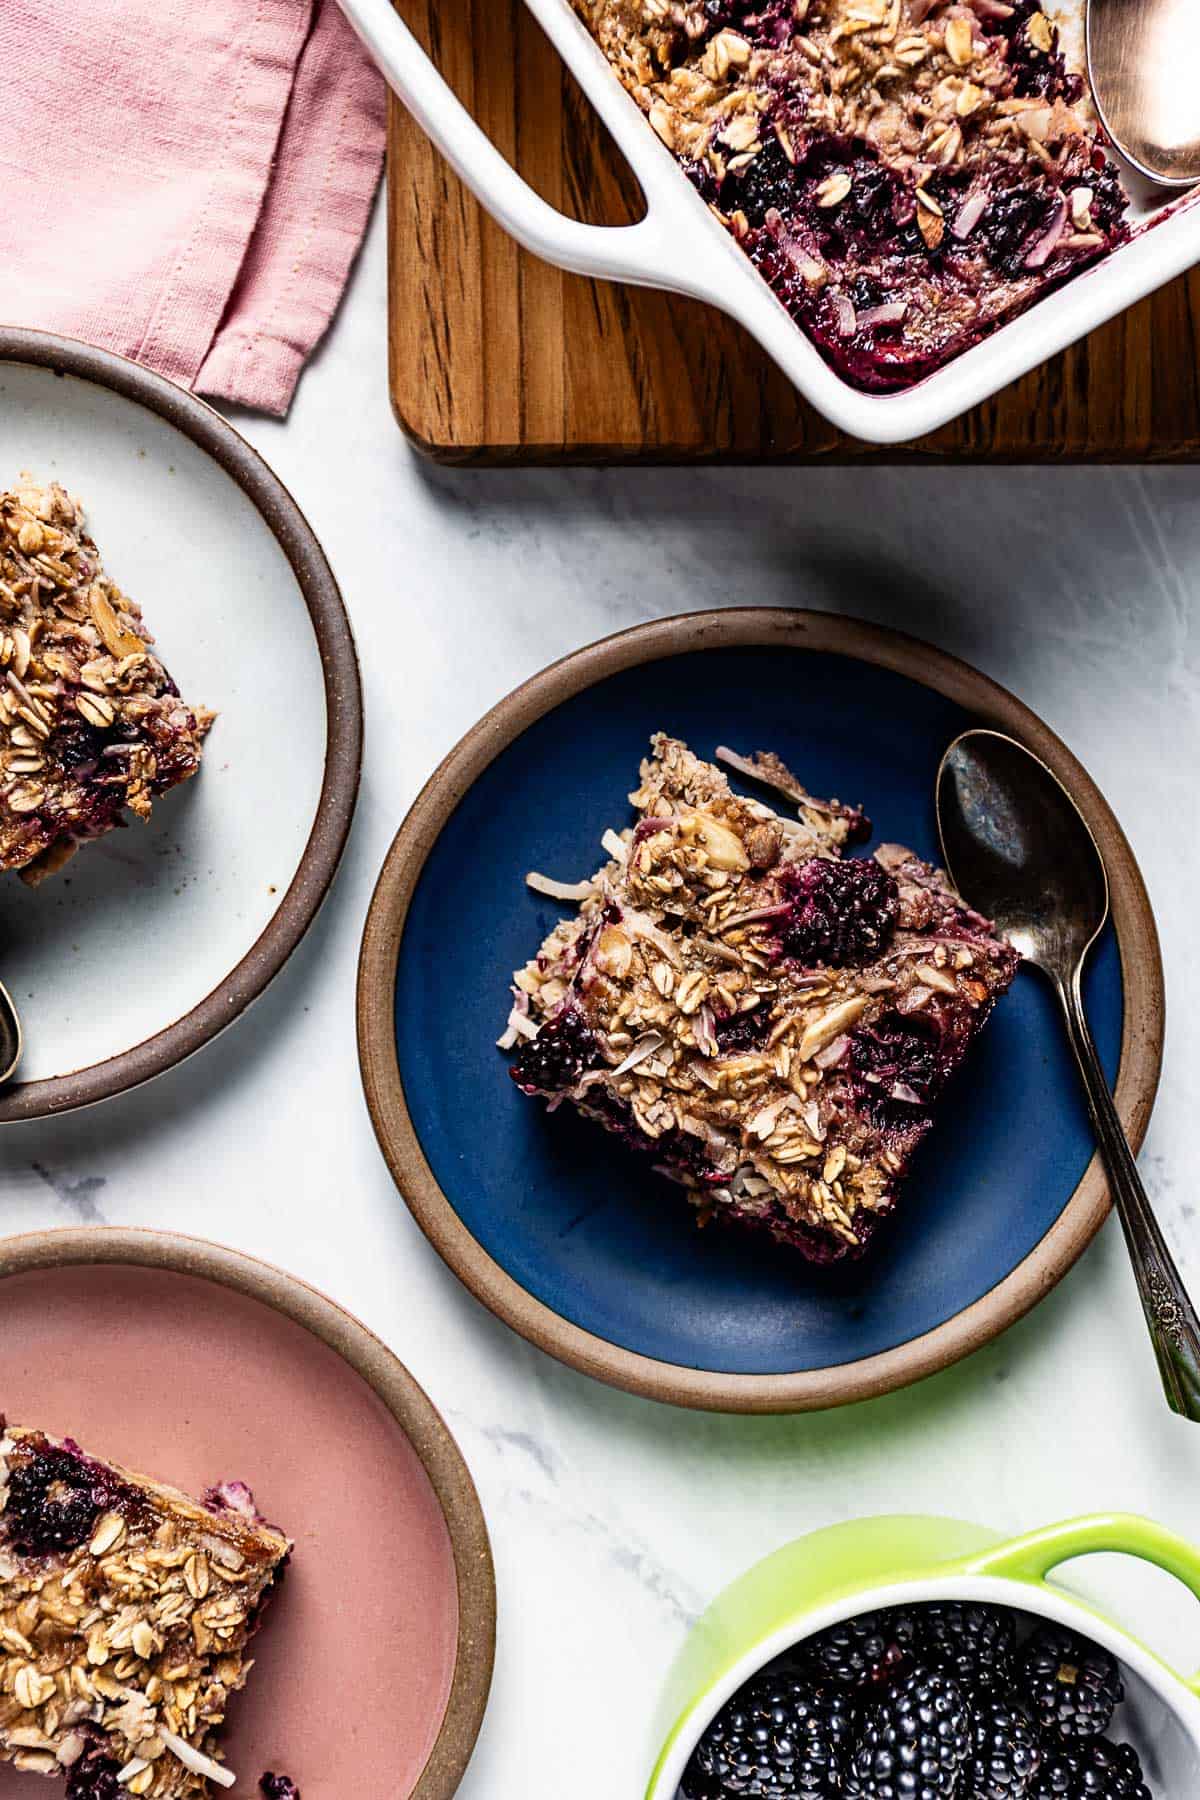 Baked blackberry oatmeal cut into slices and served on small plates.